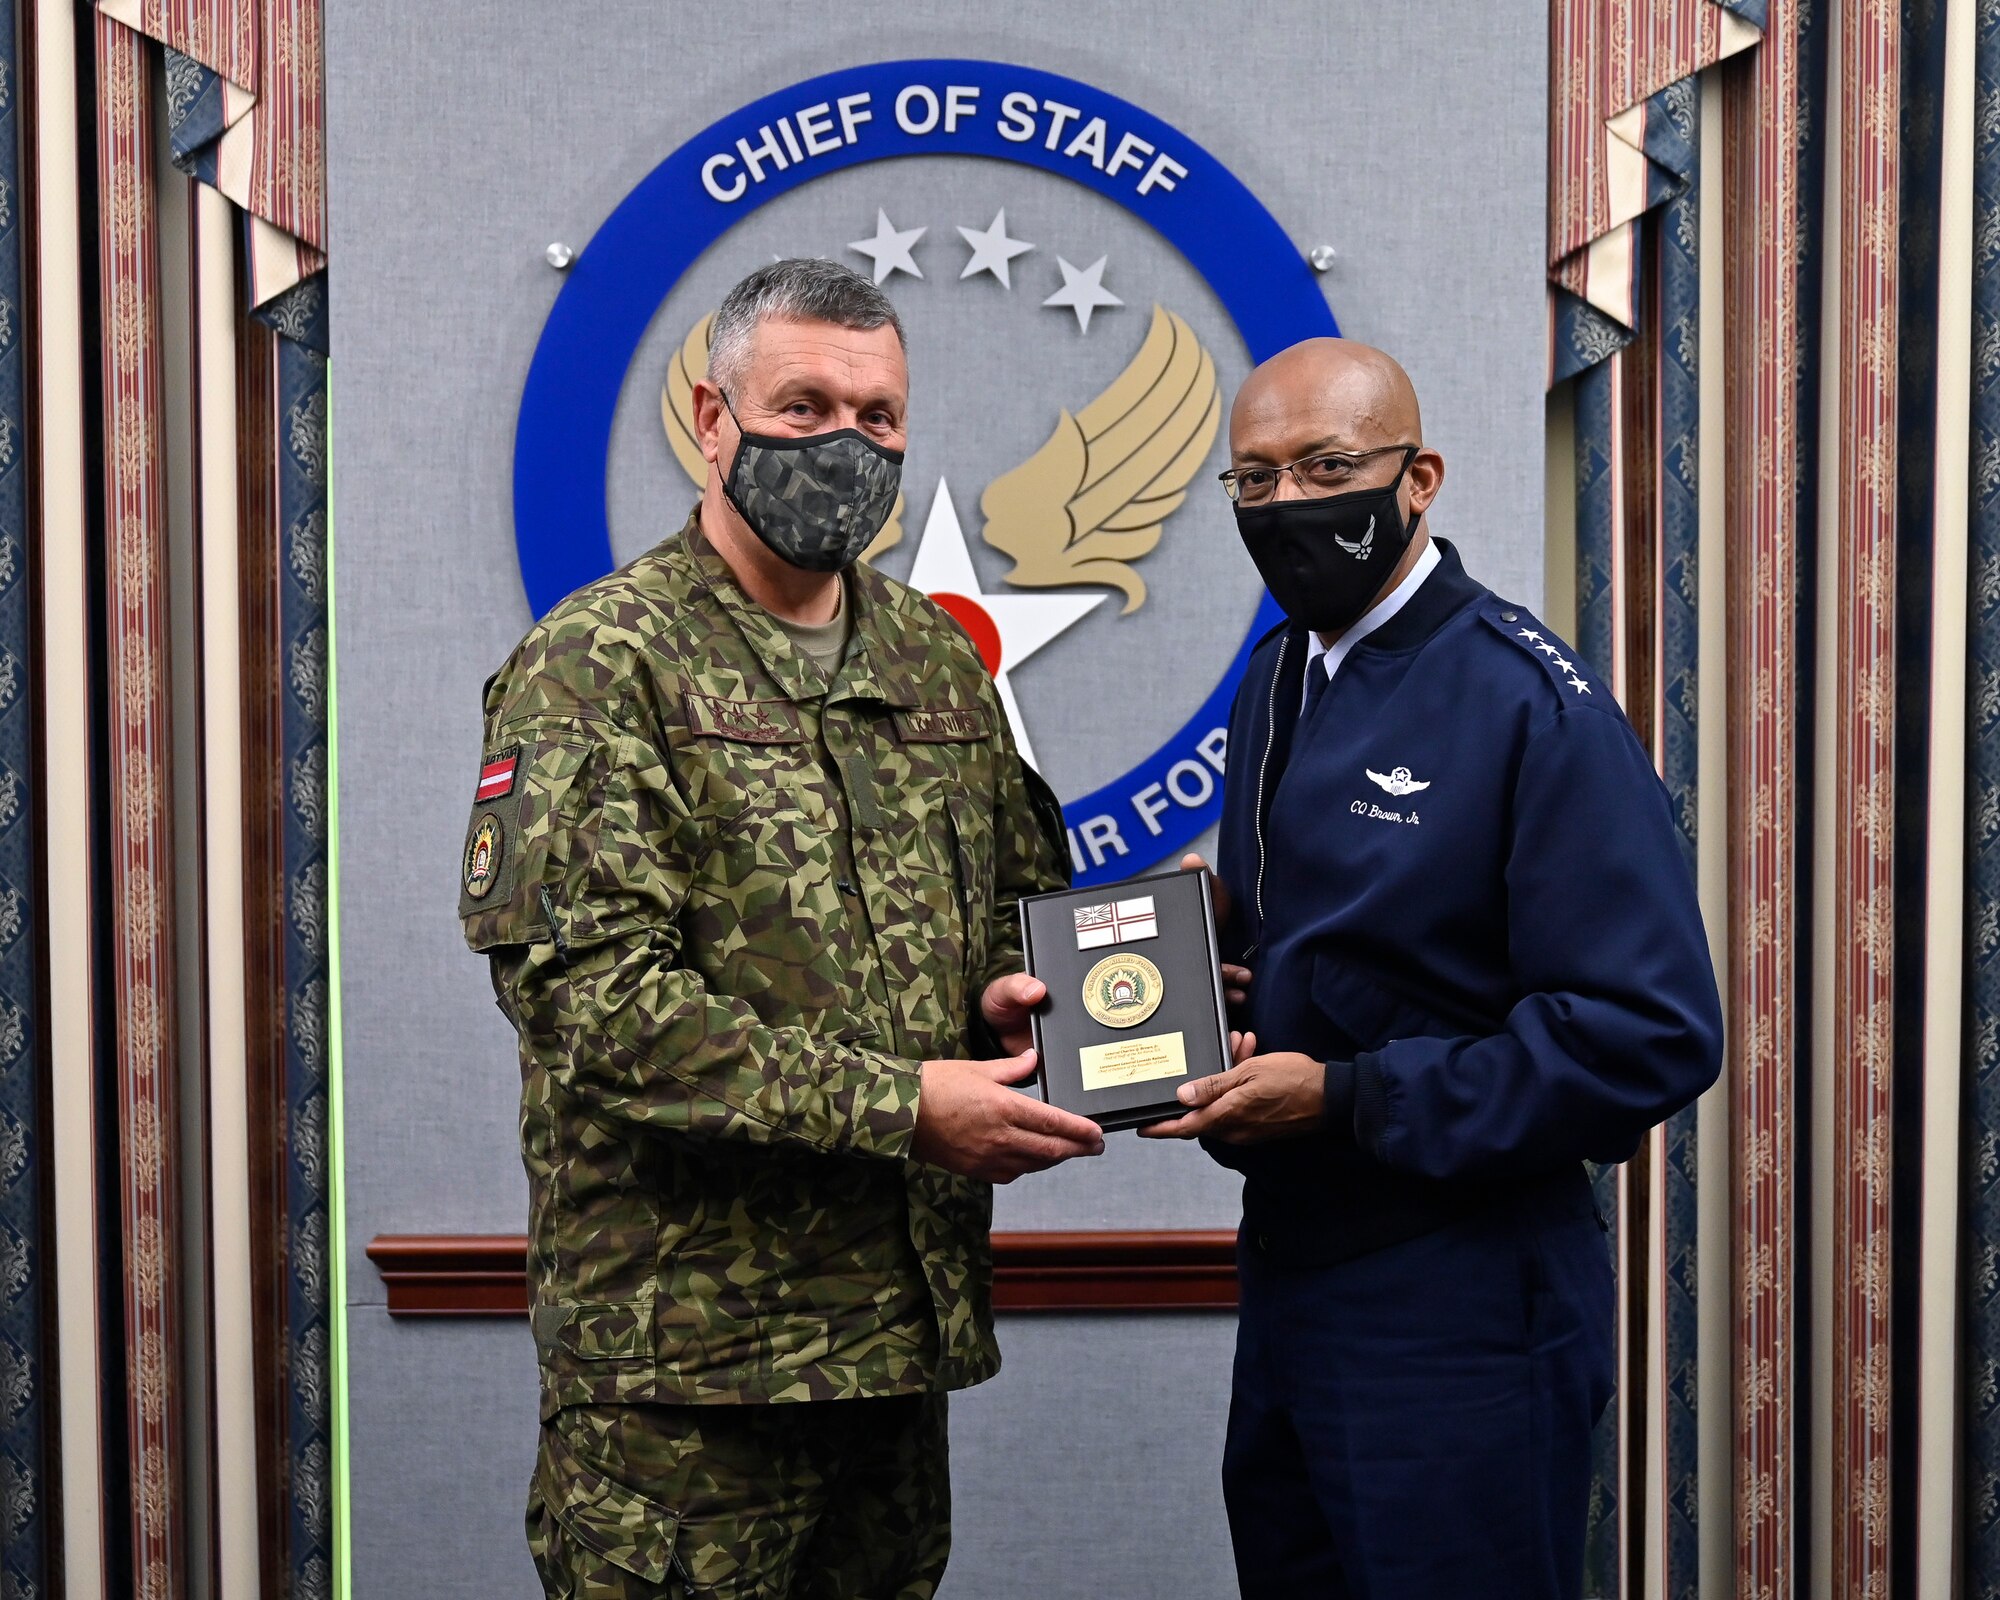 Air Force Chief of Staff Gen. CQ Brown, Jr. poses with Lt. Gen. Leonids Kalnins, Latvia chief of defense